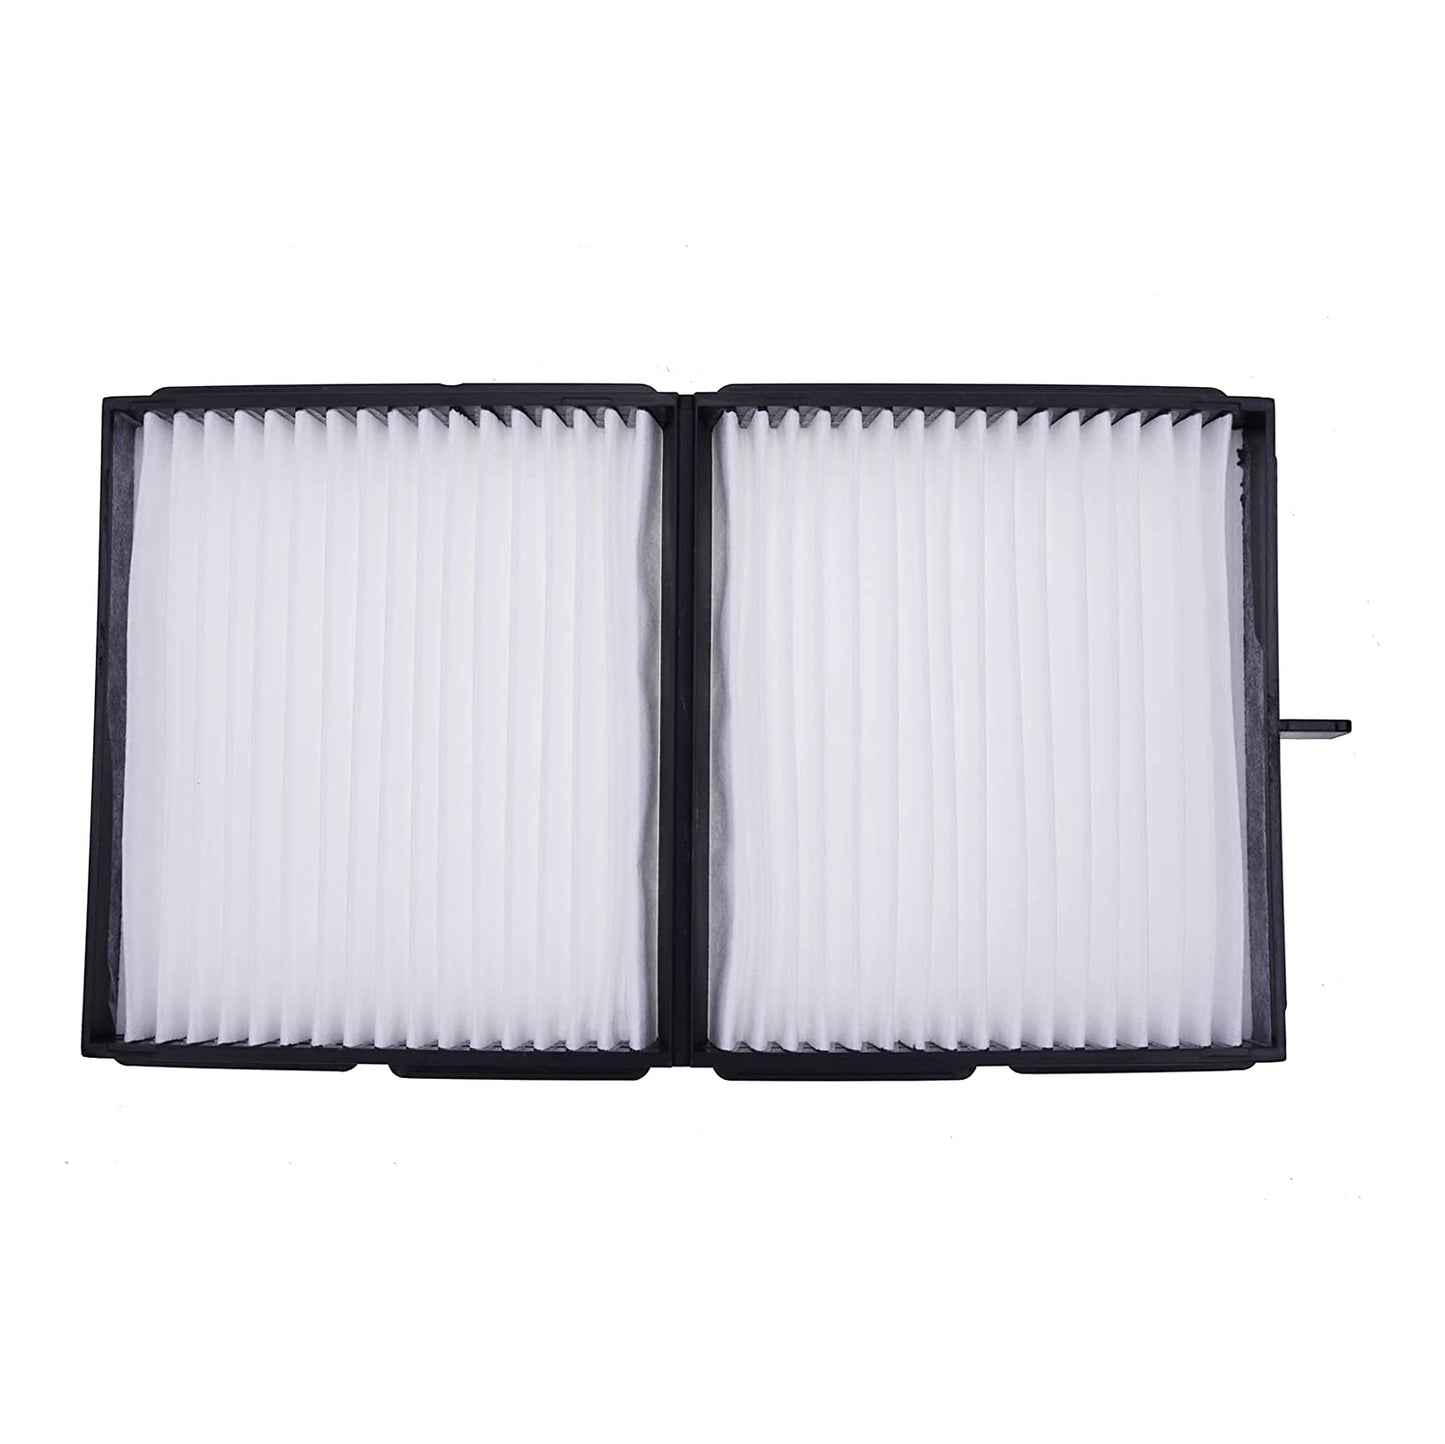 New Cabin Air Filter 20Y-979-6261 20Y-979-6261-A Compatible with Komatsu D155A-6 D155AX-5 D41E-6 D41P-6